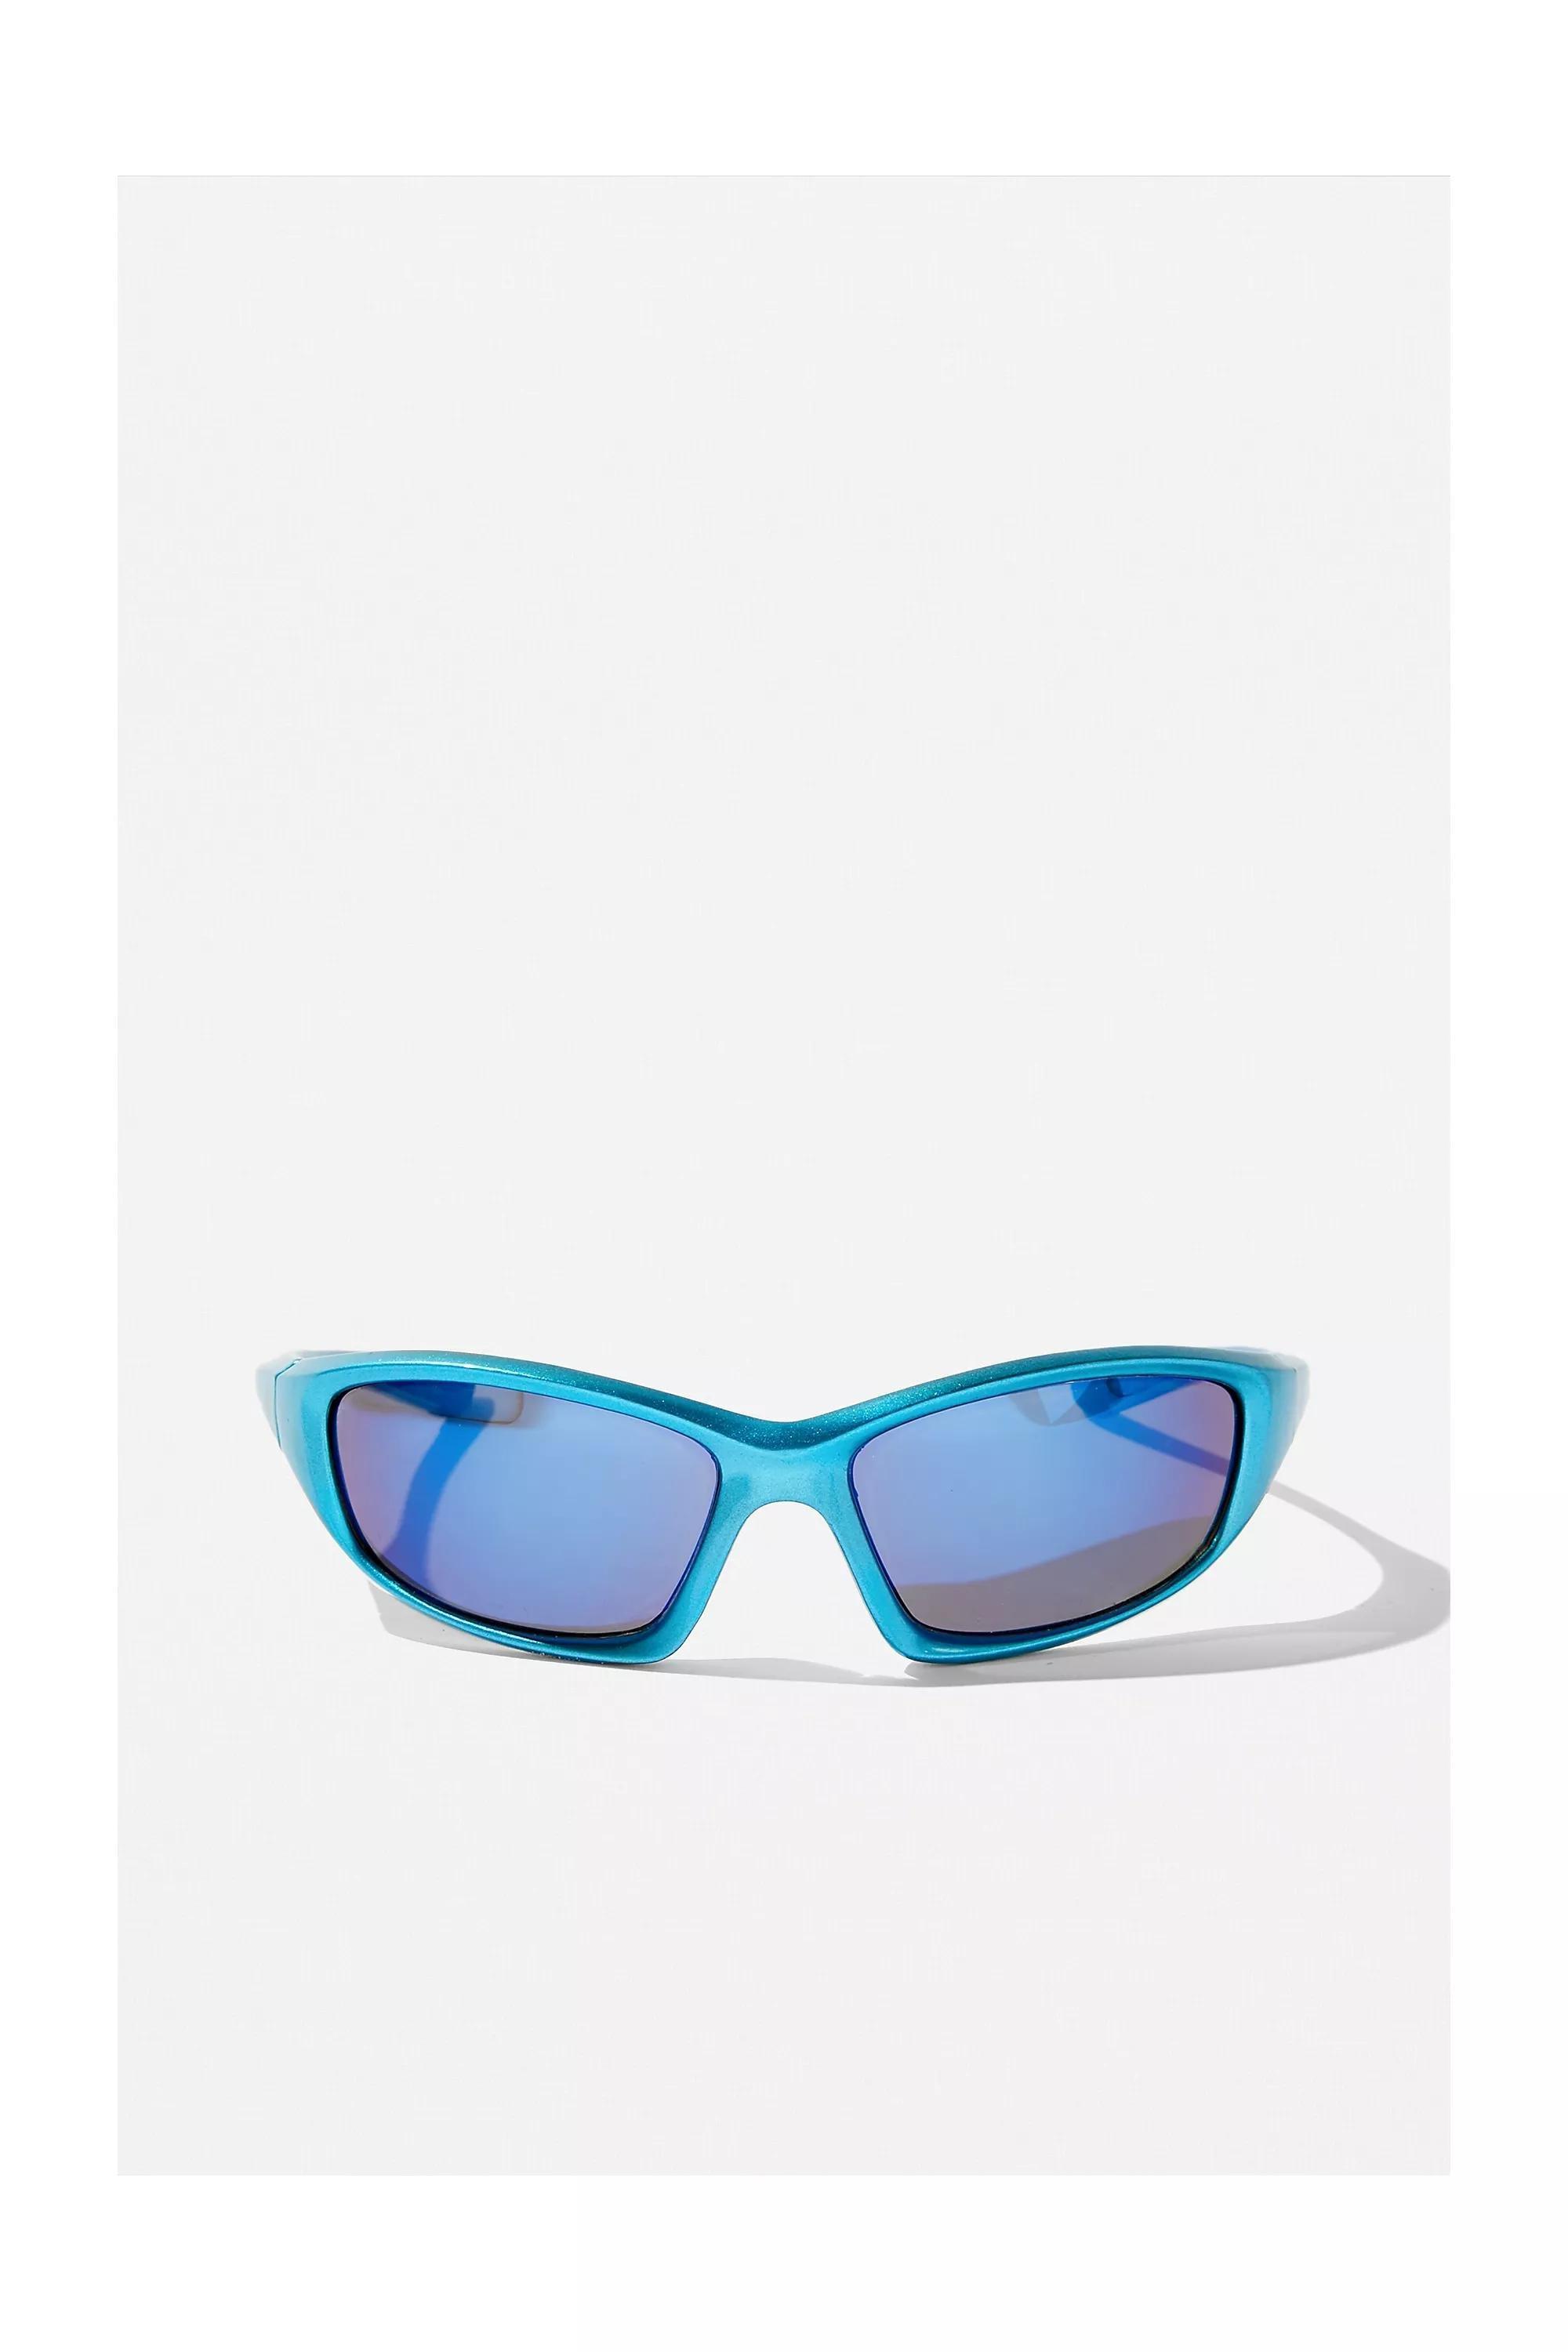 Urban Outfitters - Blue Recycled Abbie Wrap Around Sunglasses